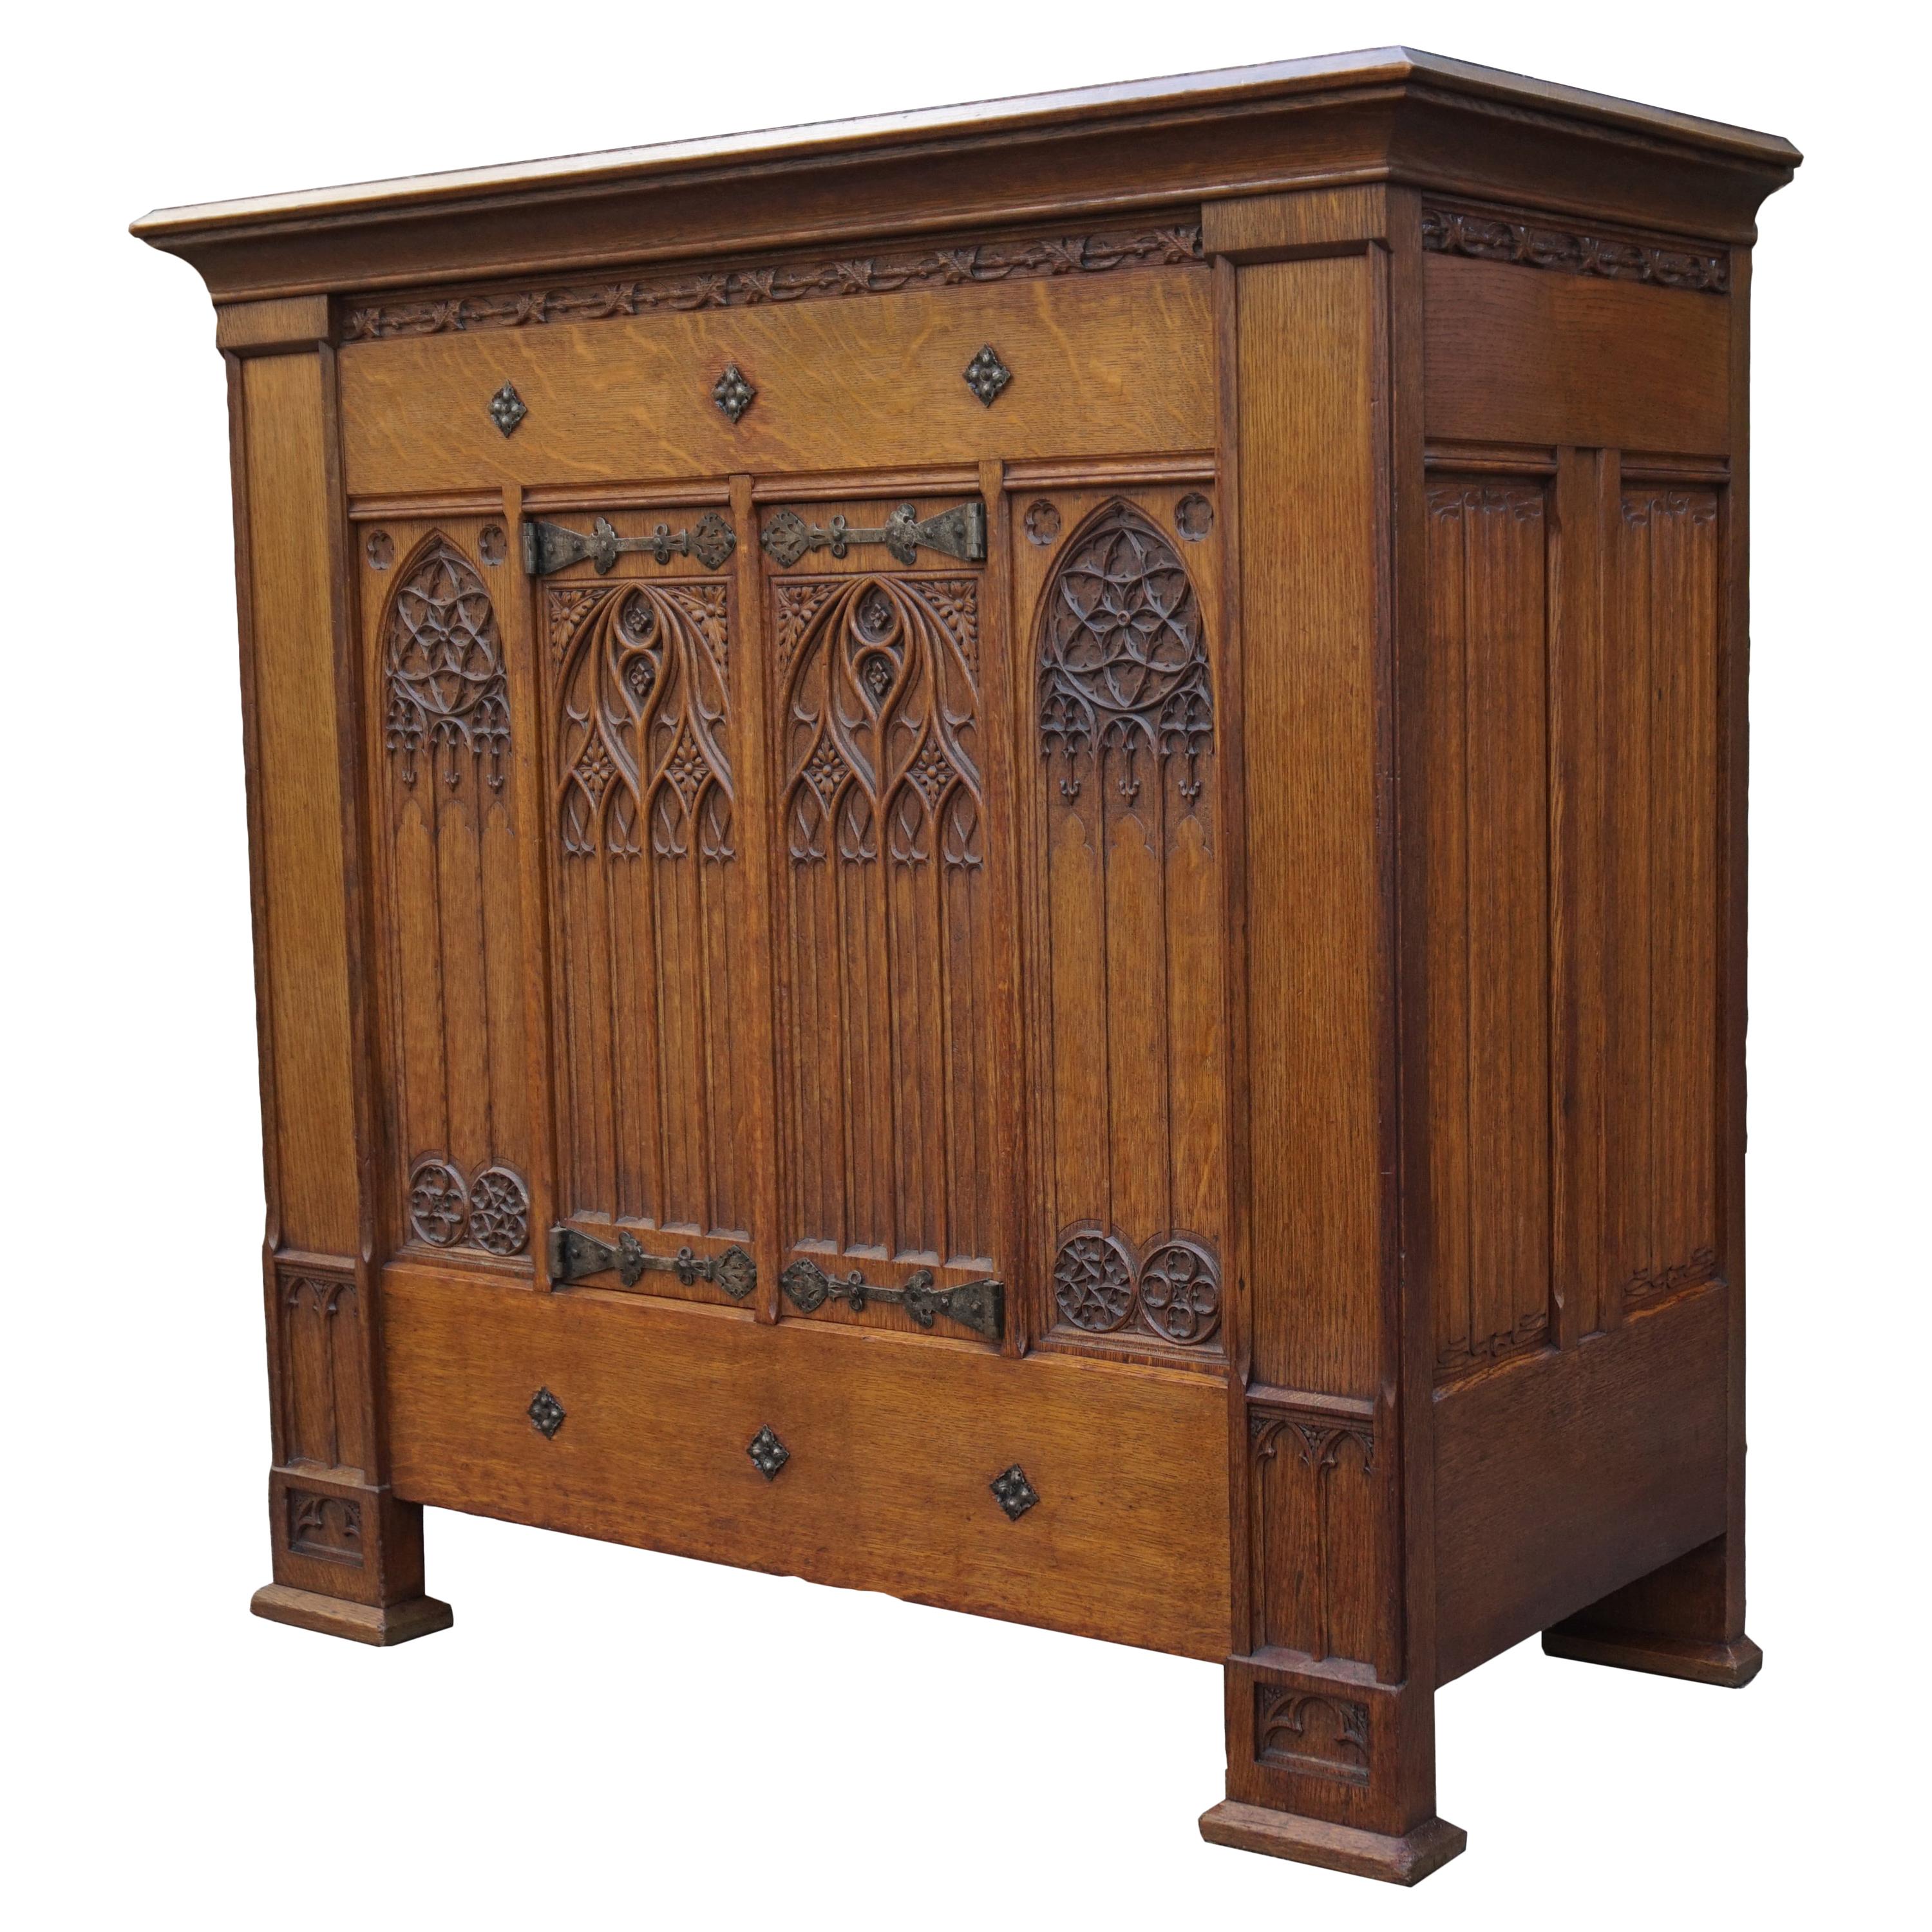 Antique Gothic Revival Credenza Sideboard Cabinet W. Hand Carved Church Windows